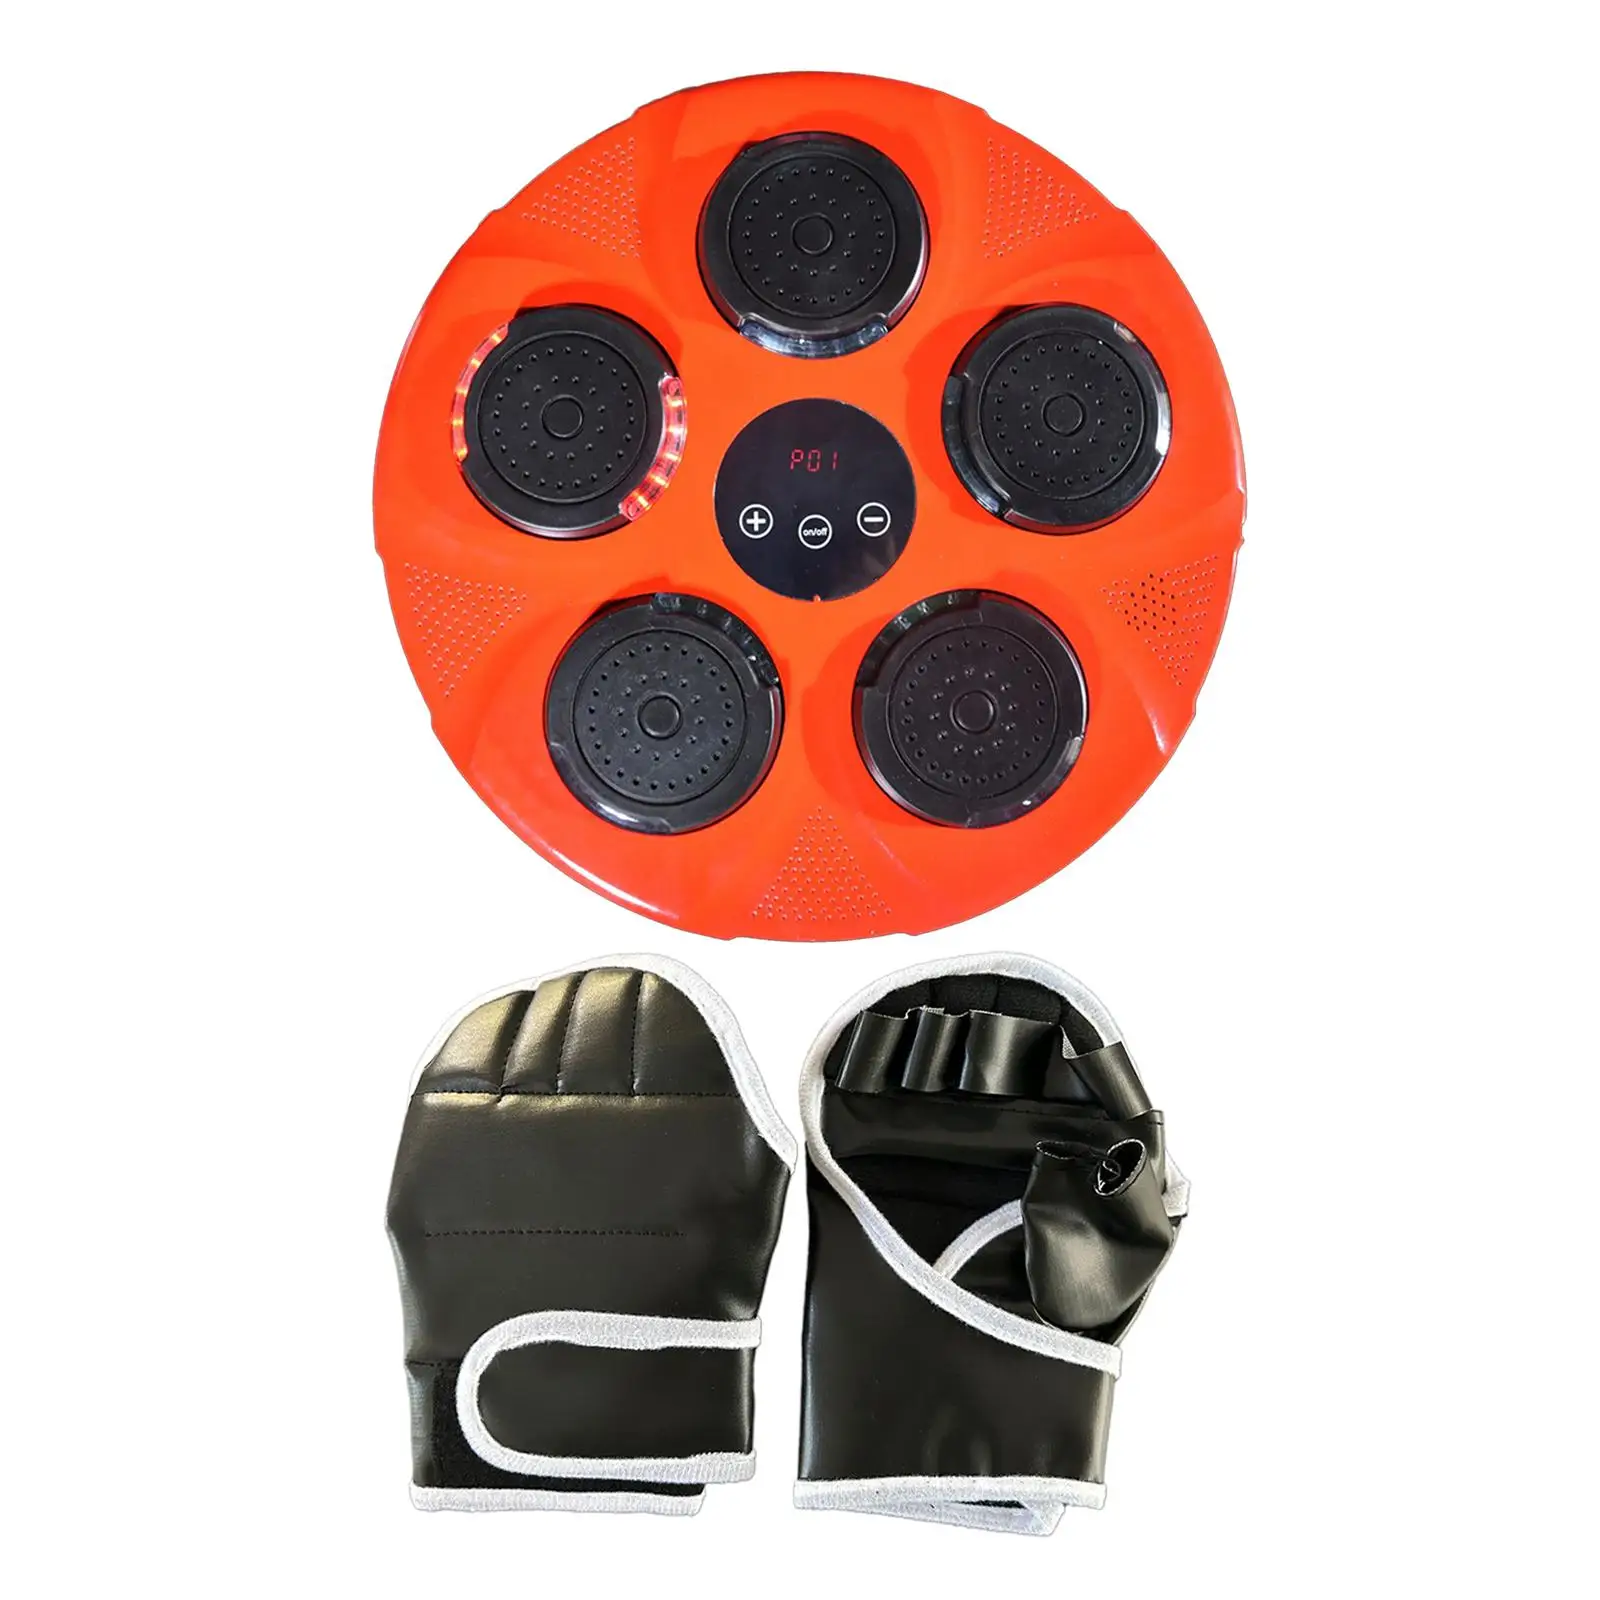 Music Boxing Machine Electronic Wall Target Boxing Trainer for Home Gym Improves Perception Exercise Workout Sports